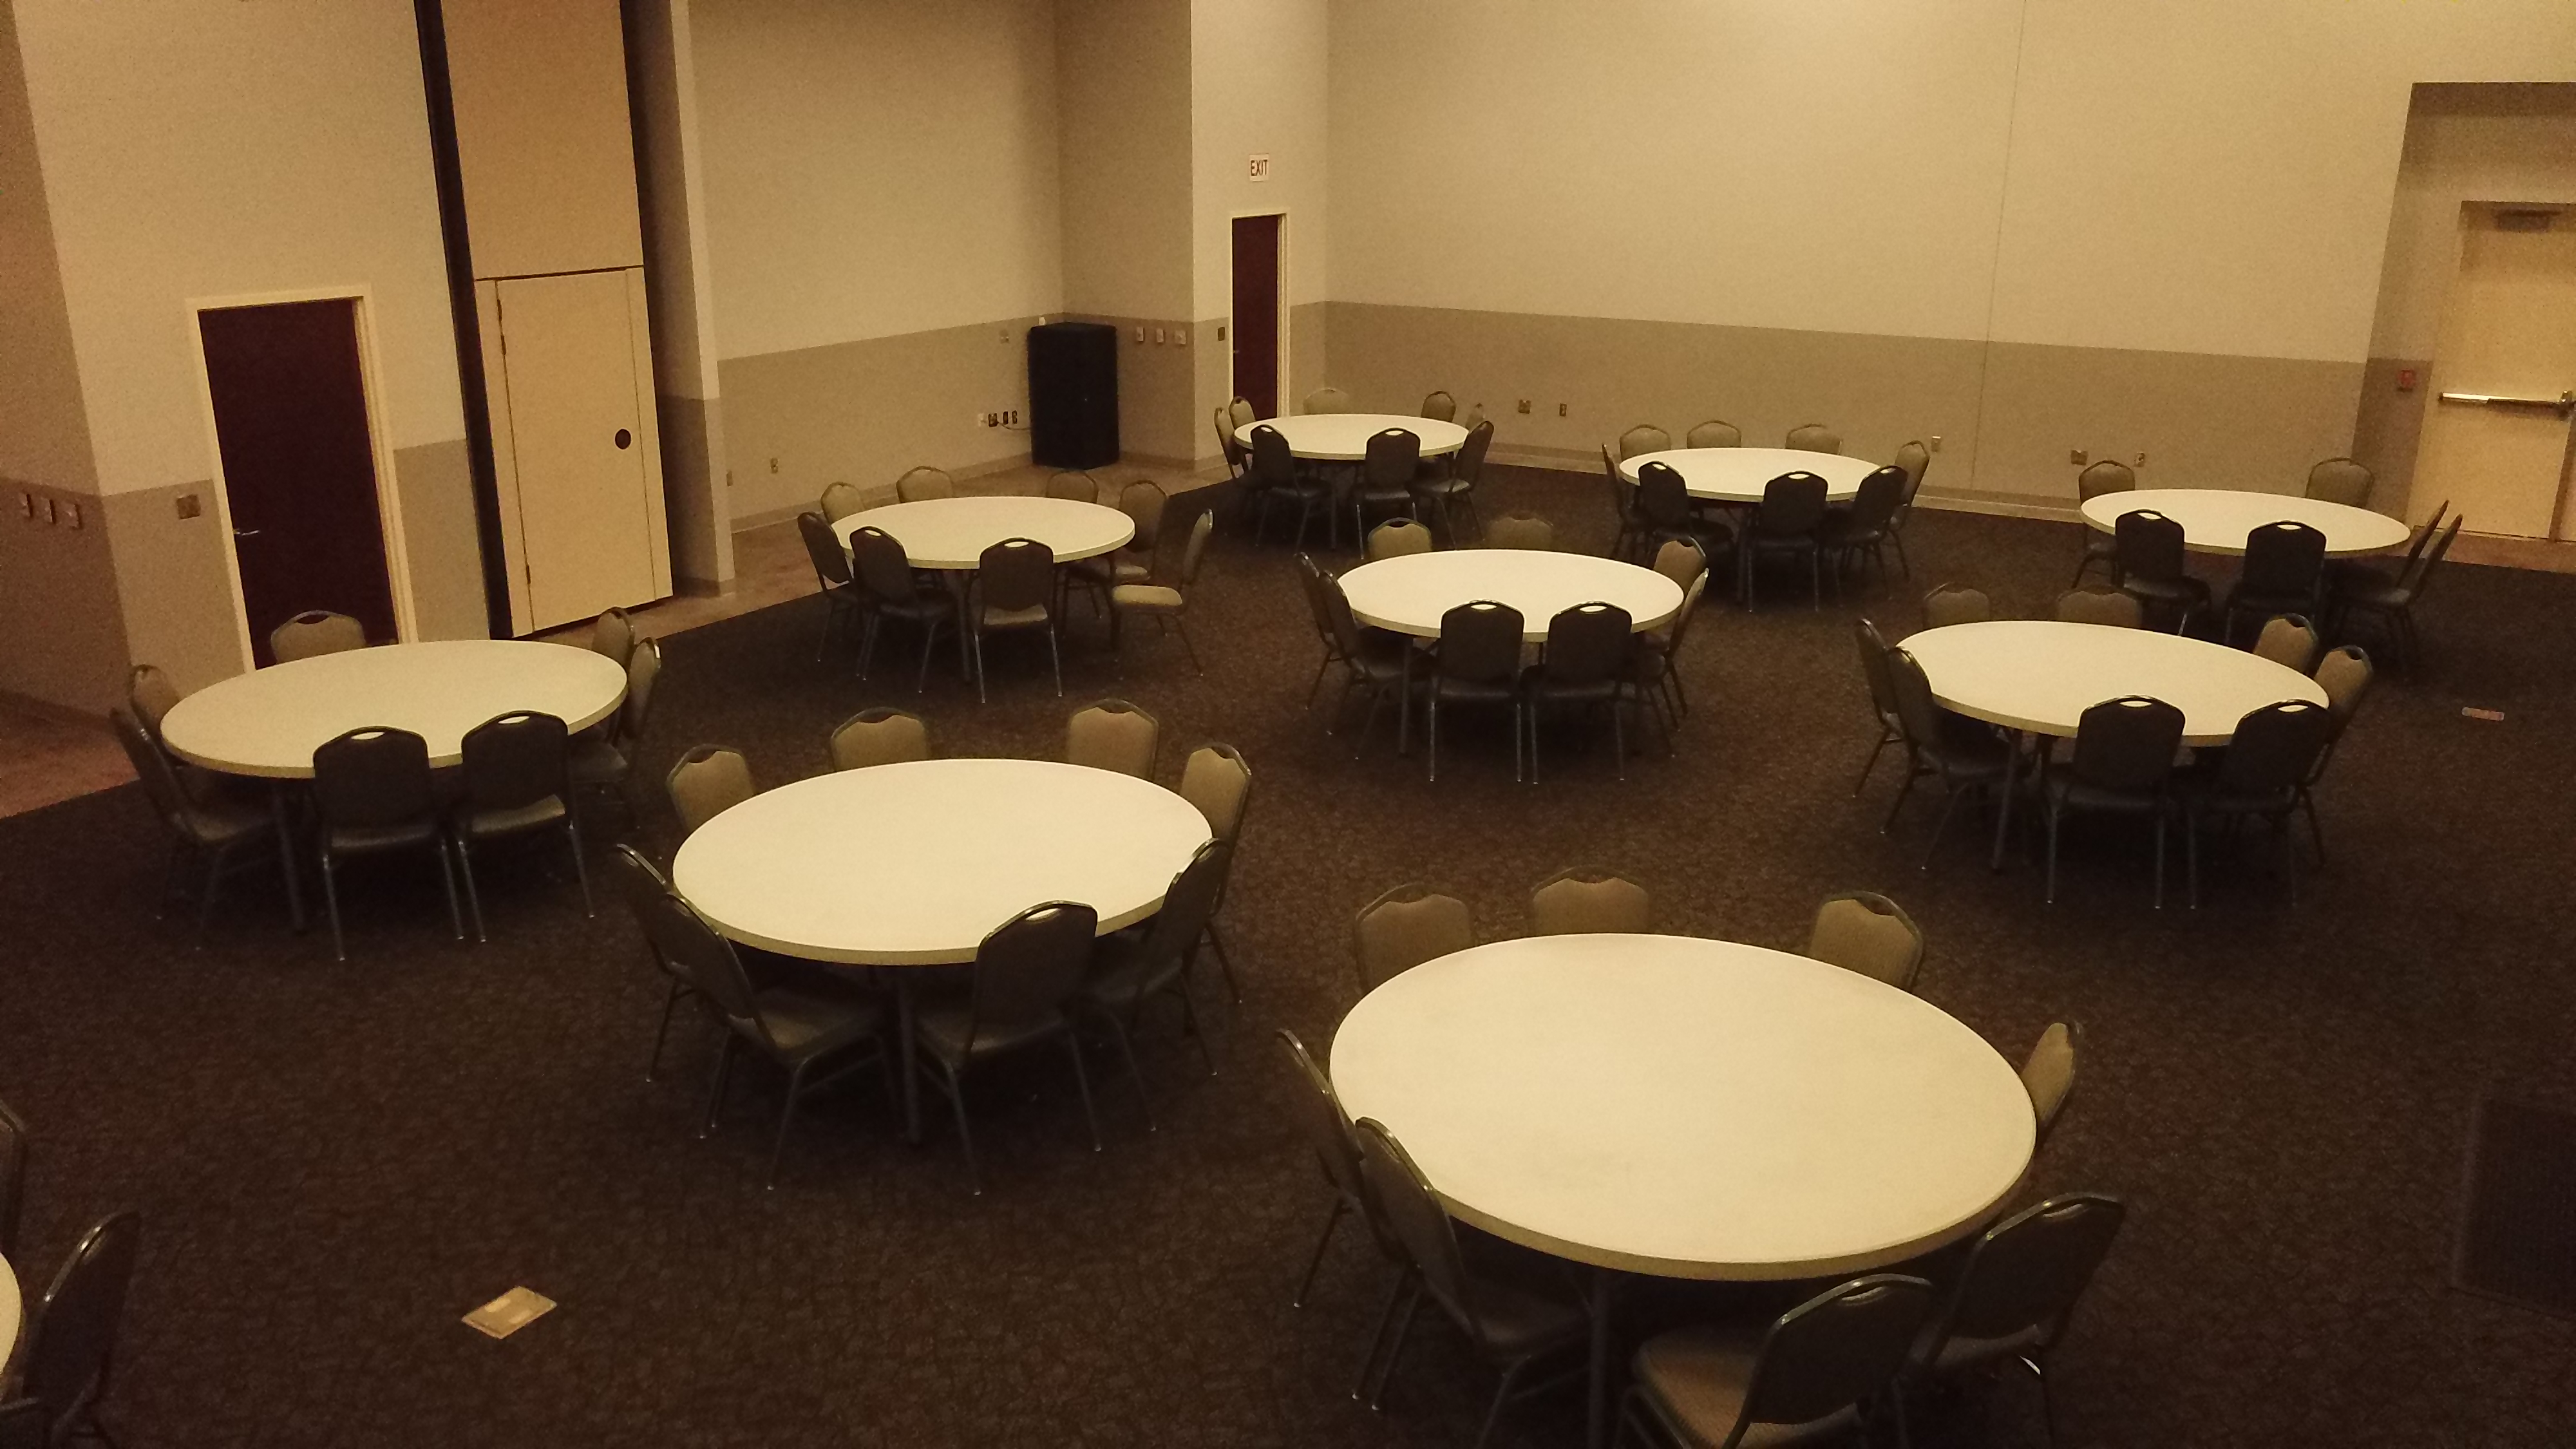 Room with round tables and chairs at tables